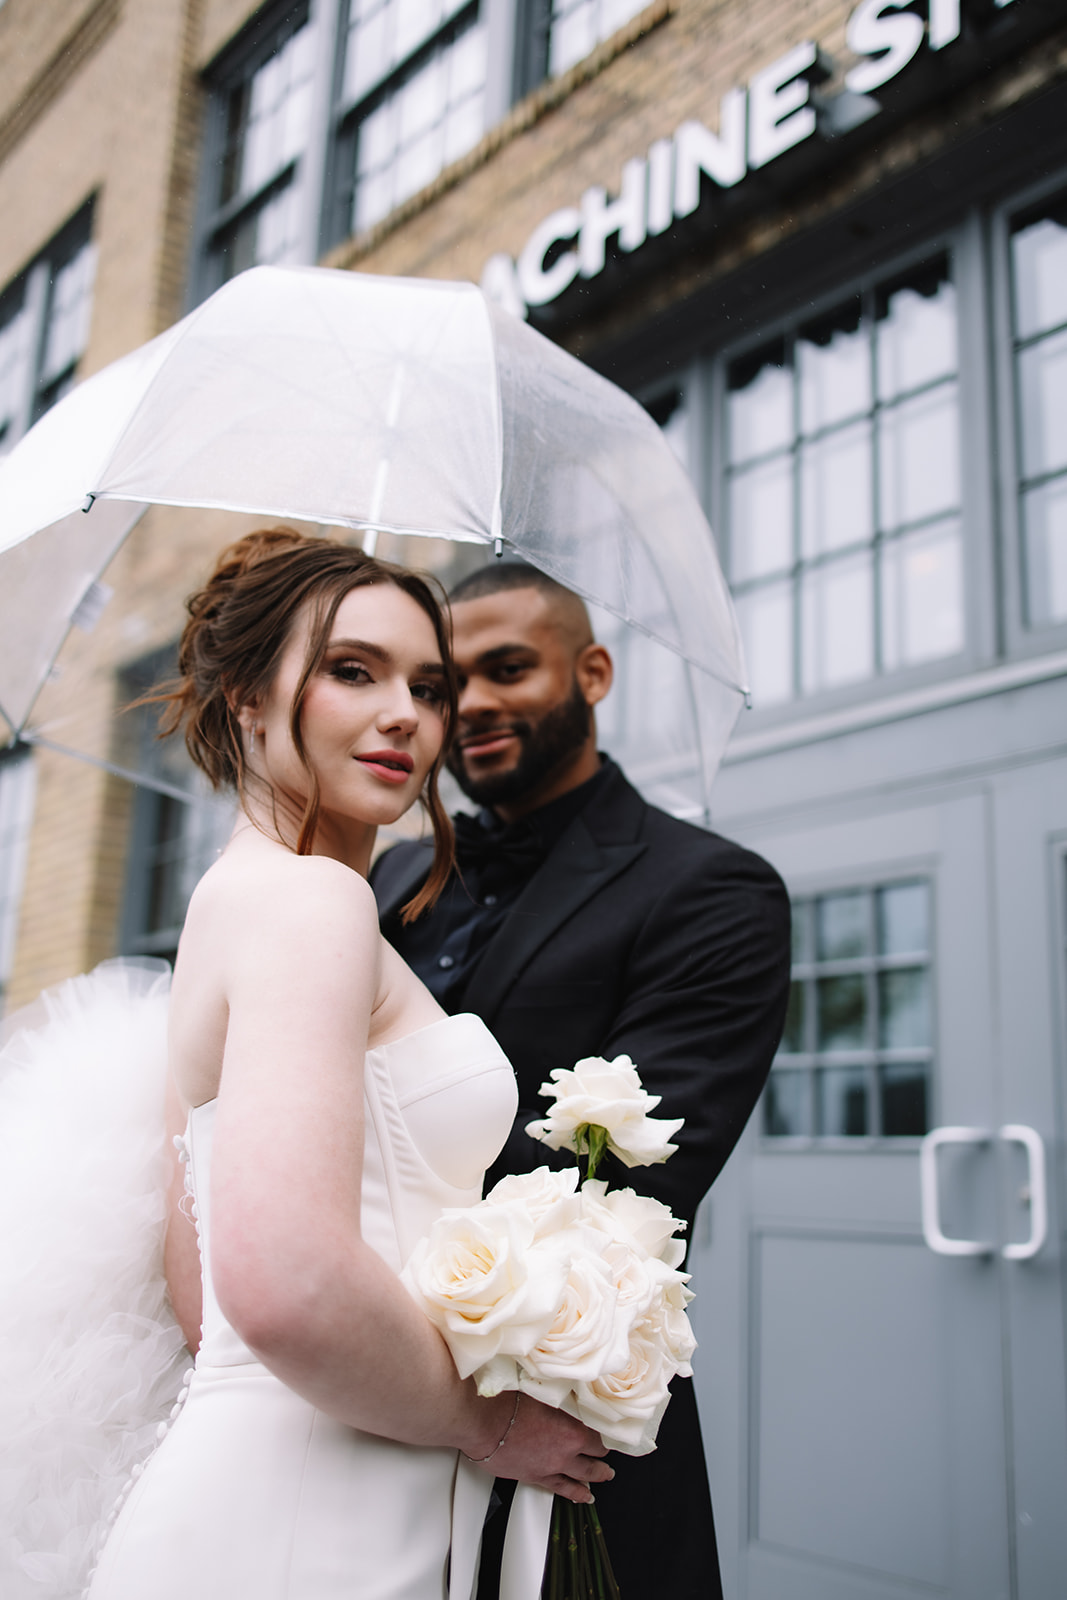 A bride in a white dress holding white roses and a groom in a black suit stand under a transparent umbrella on a rainy day in front of a brick building at the machine shop in minneapolis